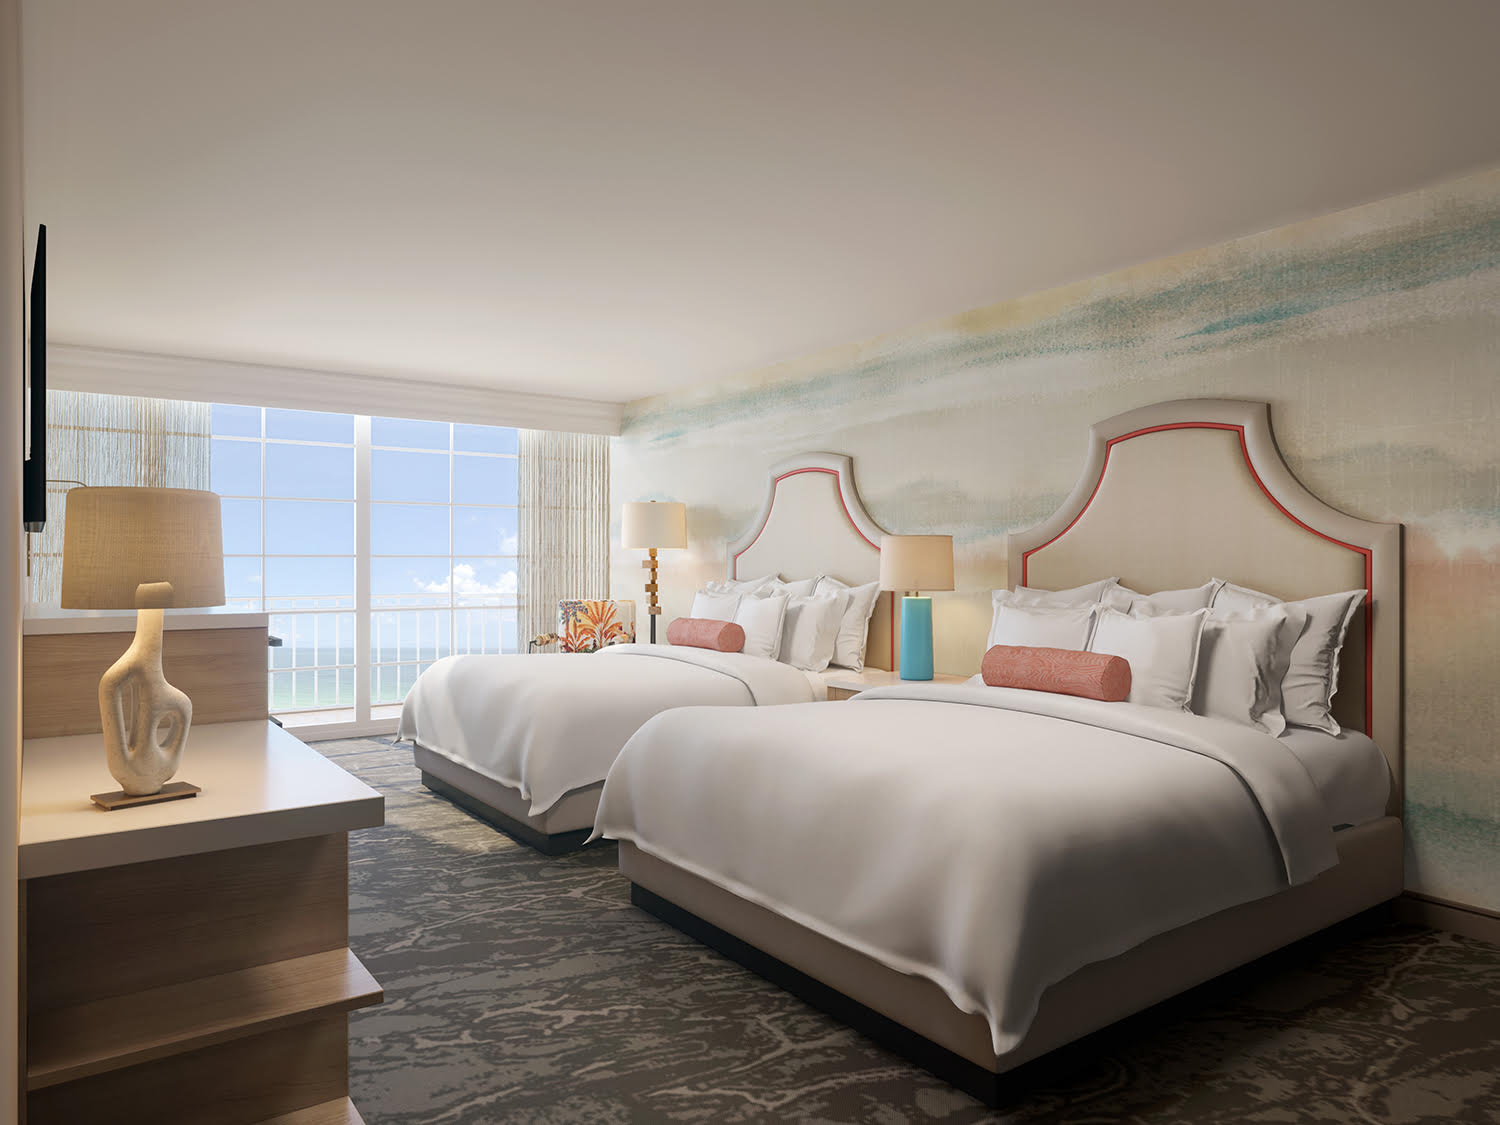 Experience Luxury and Coastal Comfort at Our Cape May Hotel - Your Perfect Beach Getaway!